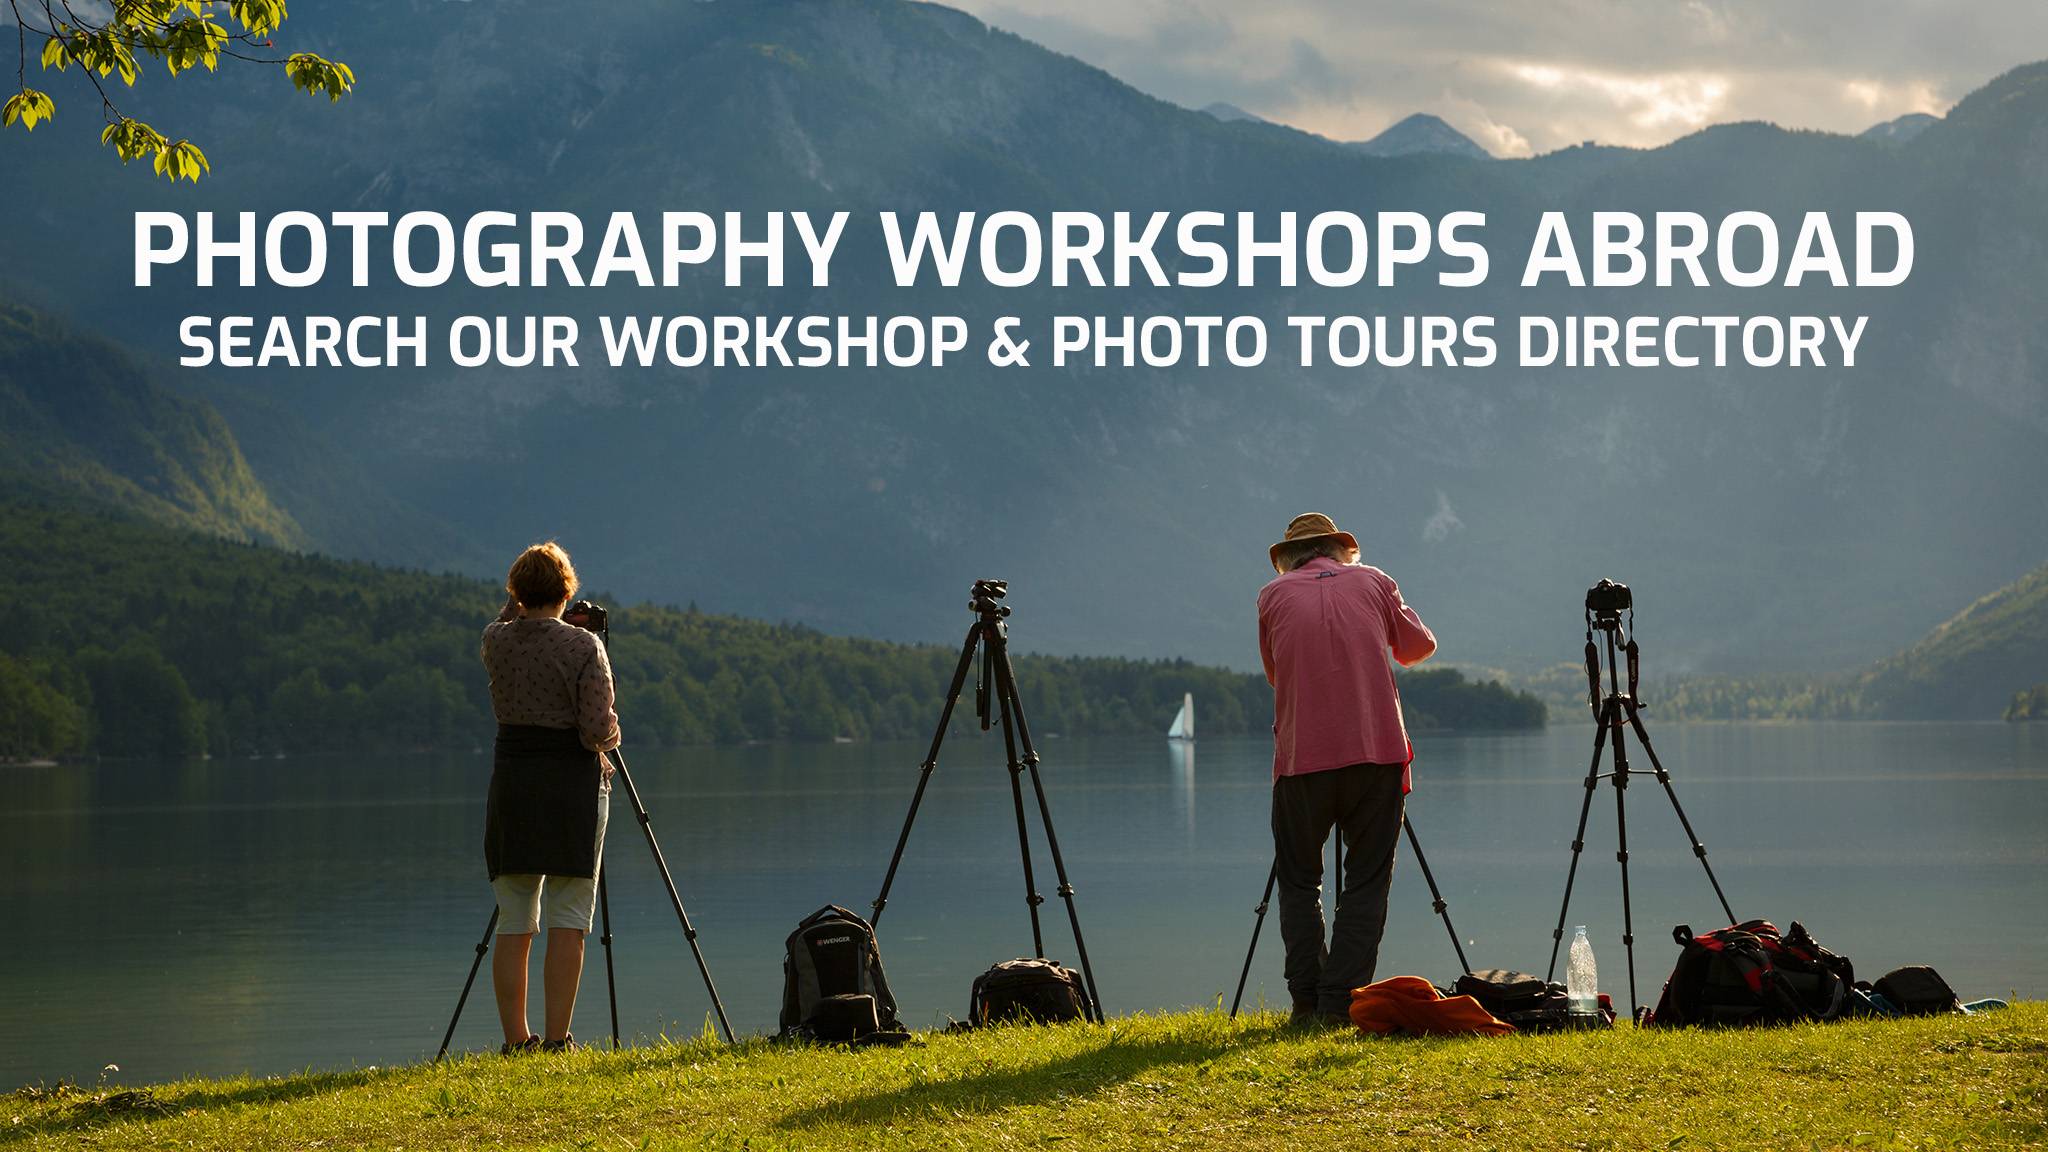 Find photography workshops and tours around the world here.